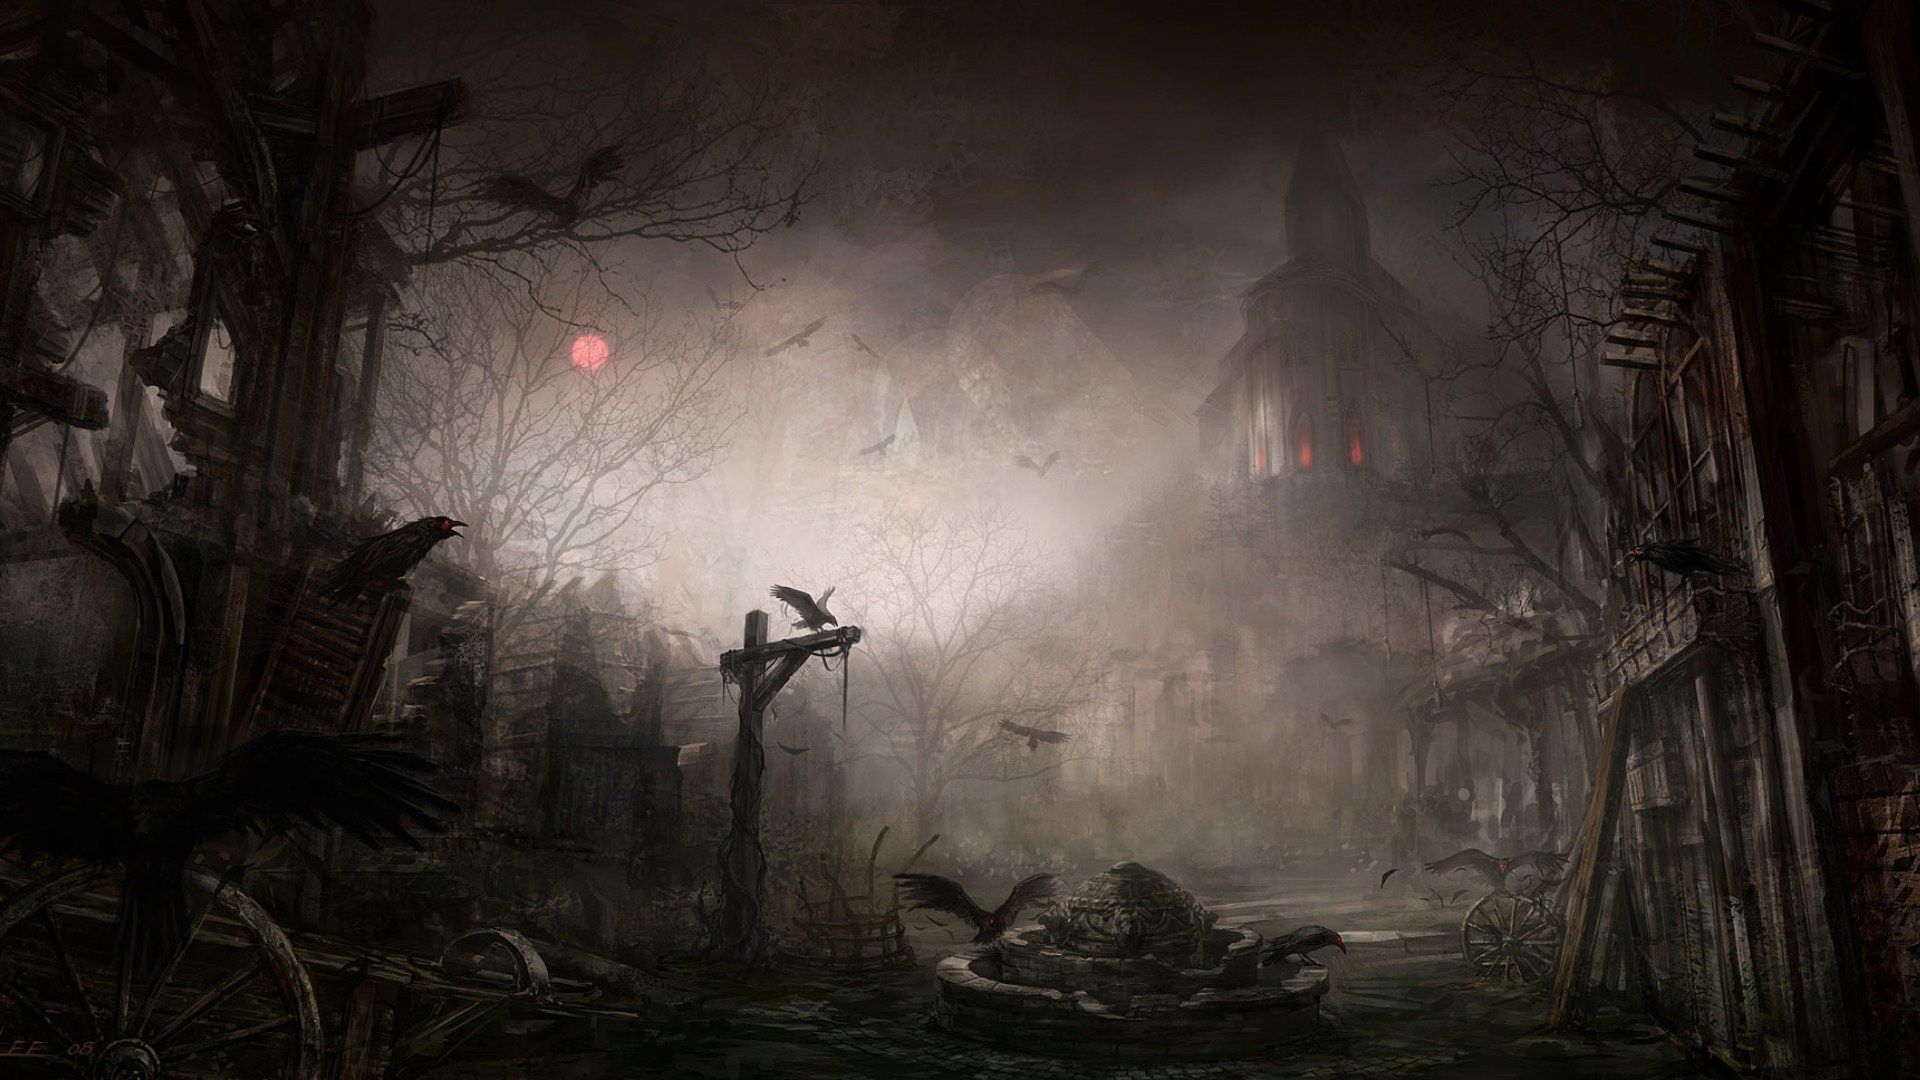 Download Creepy Landscape Wallpaper 1080p for iphone, pc desktop, android, or mac. desktop, hd. Gothic wallpaper, Scary background, Halloween wallpaper